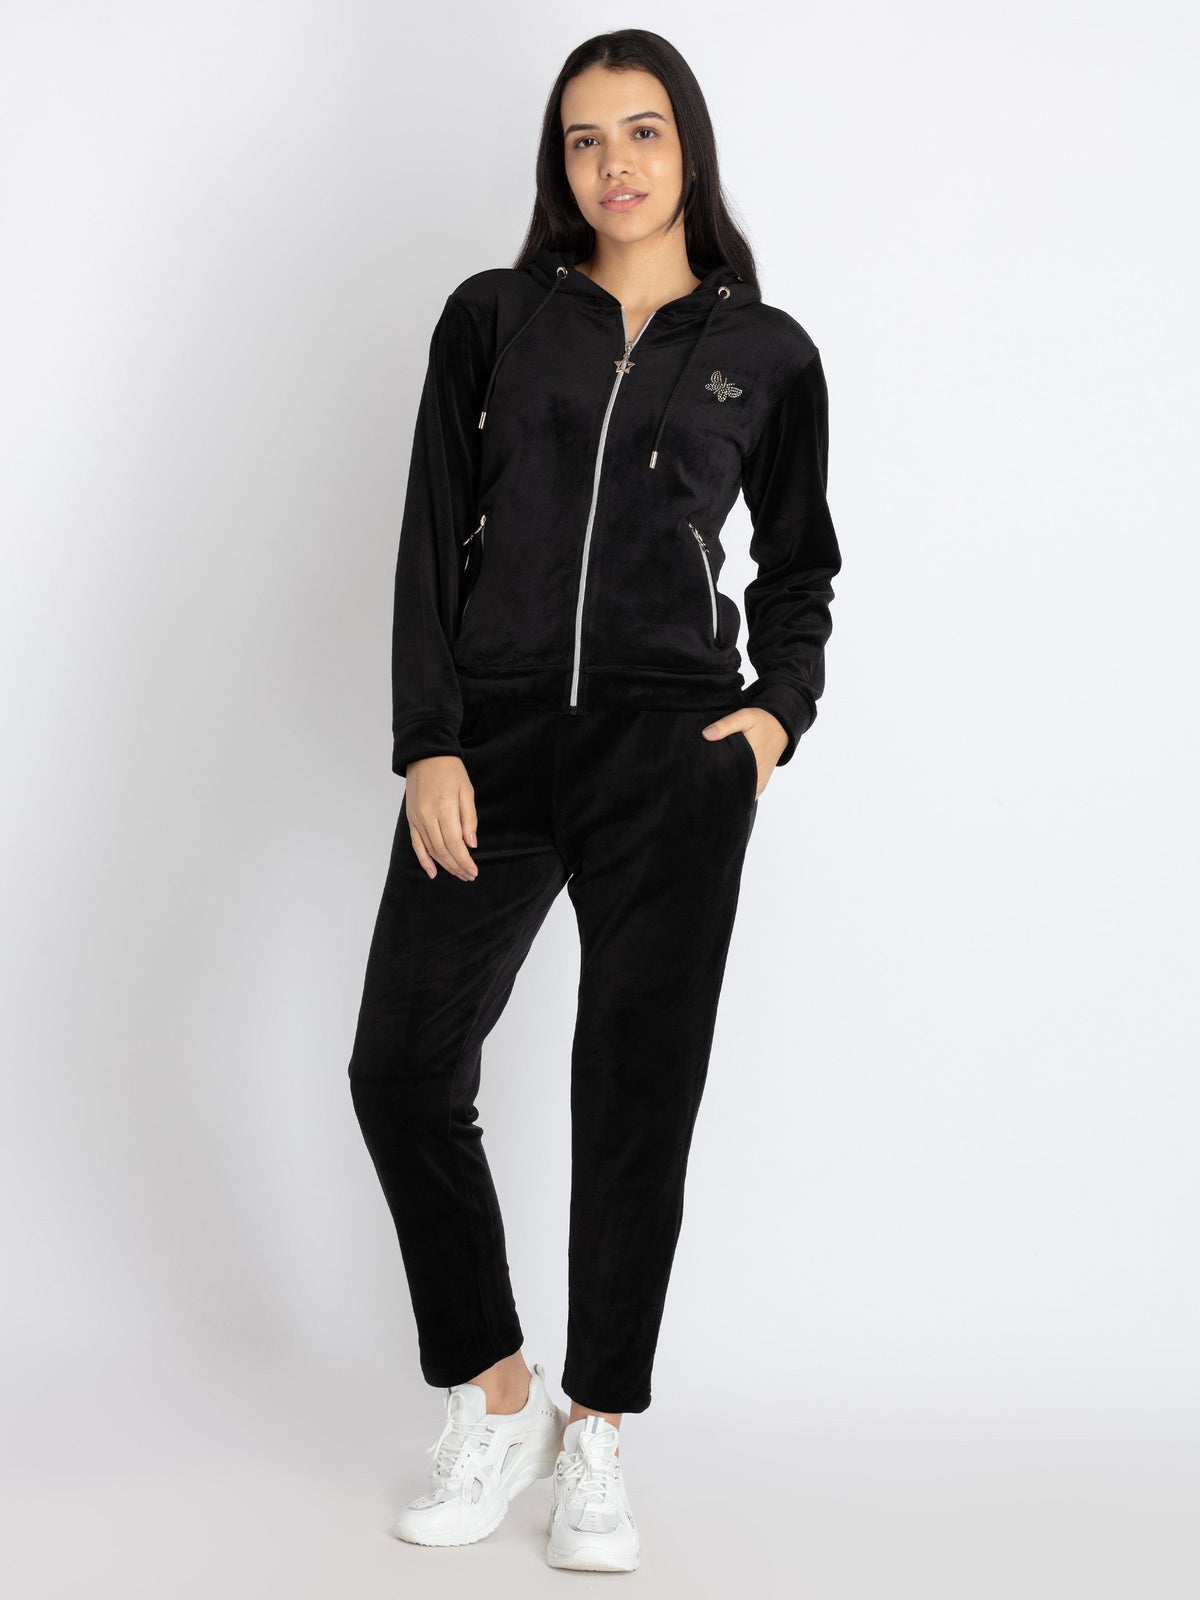 tracksuit for women